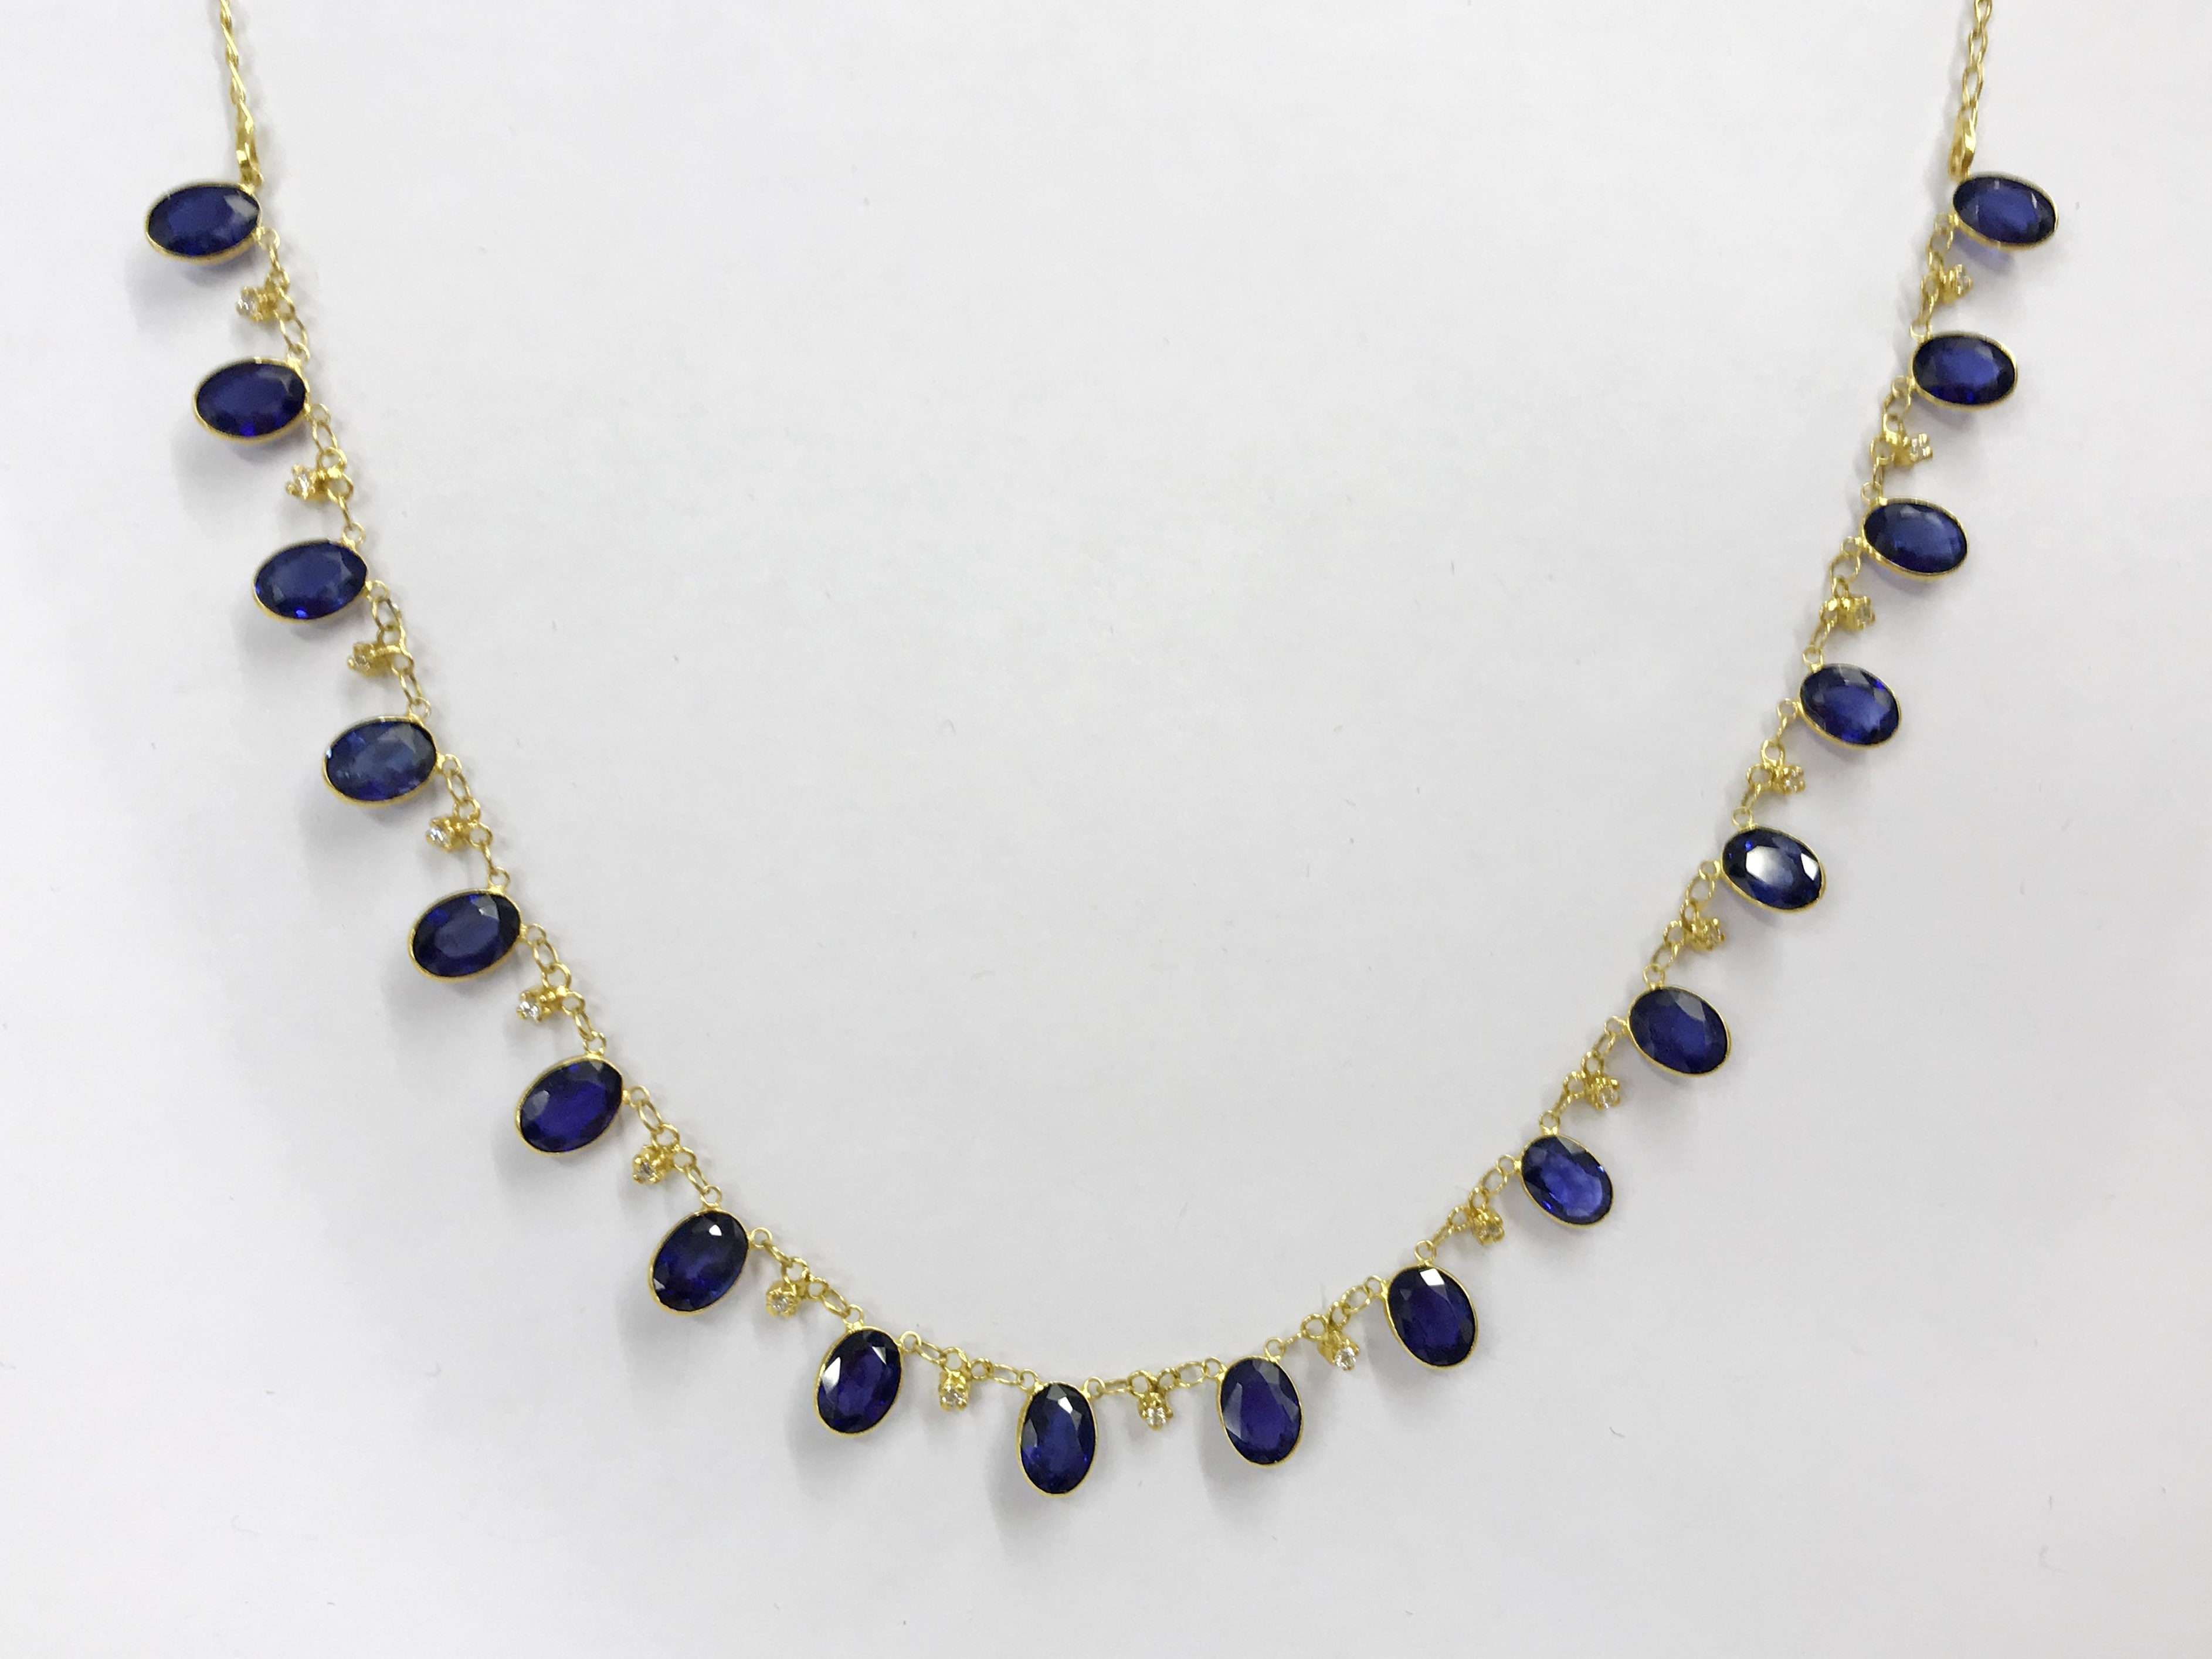 14CT GOLD SAPPHIRE & DIAMOND NECKLACE - Image 5 of 6